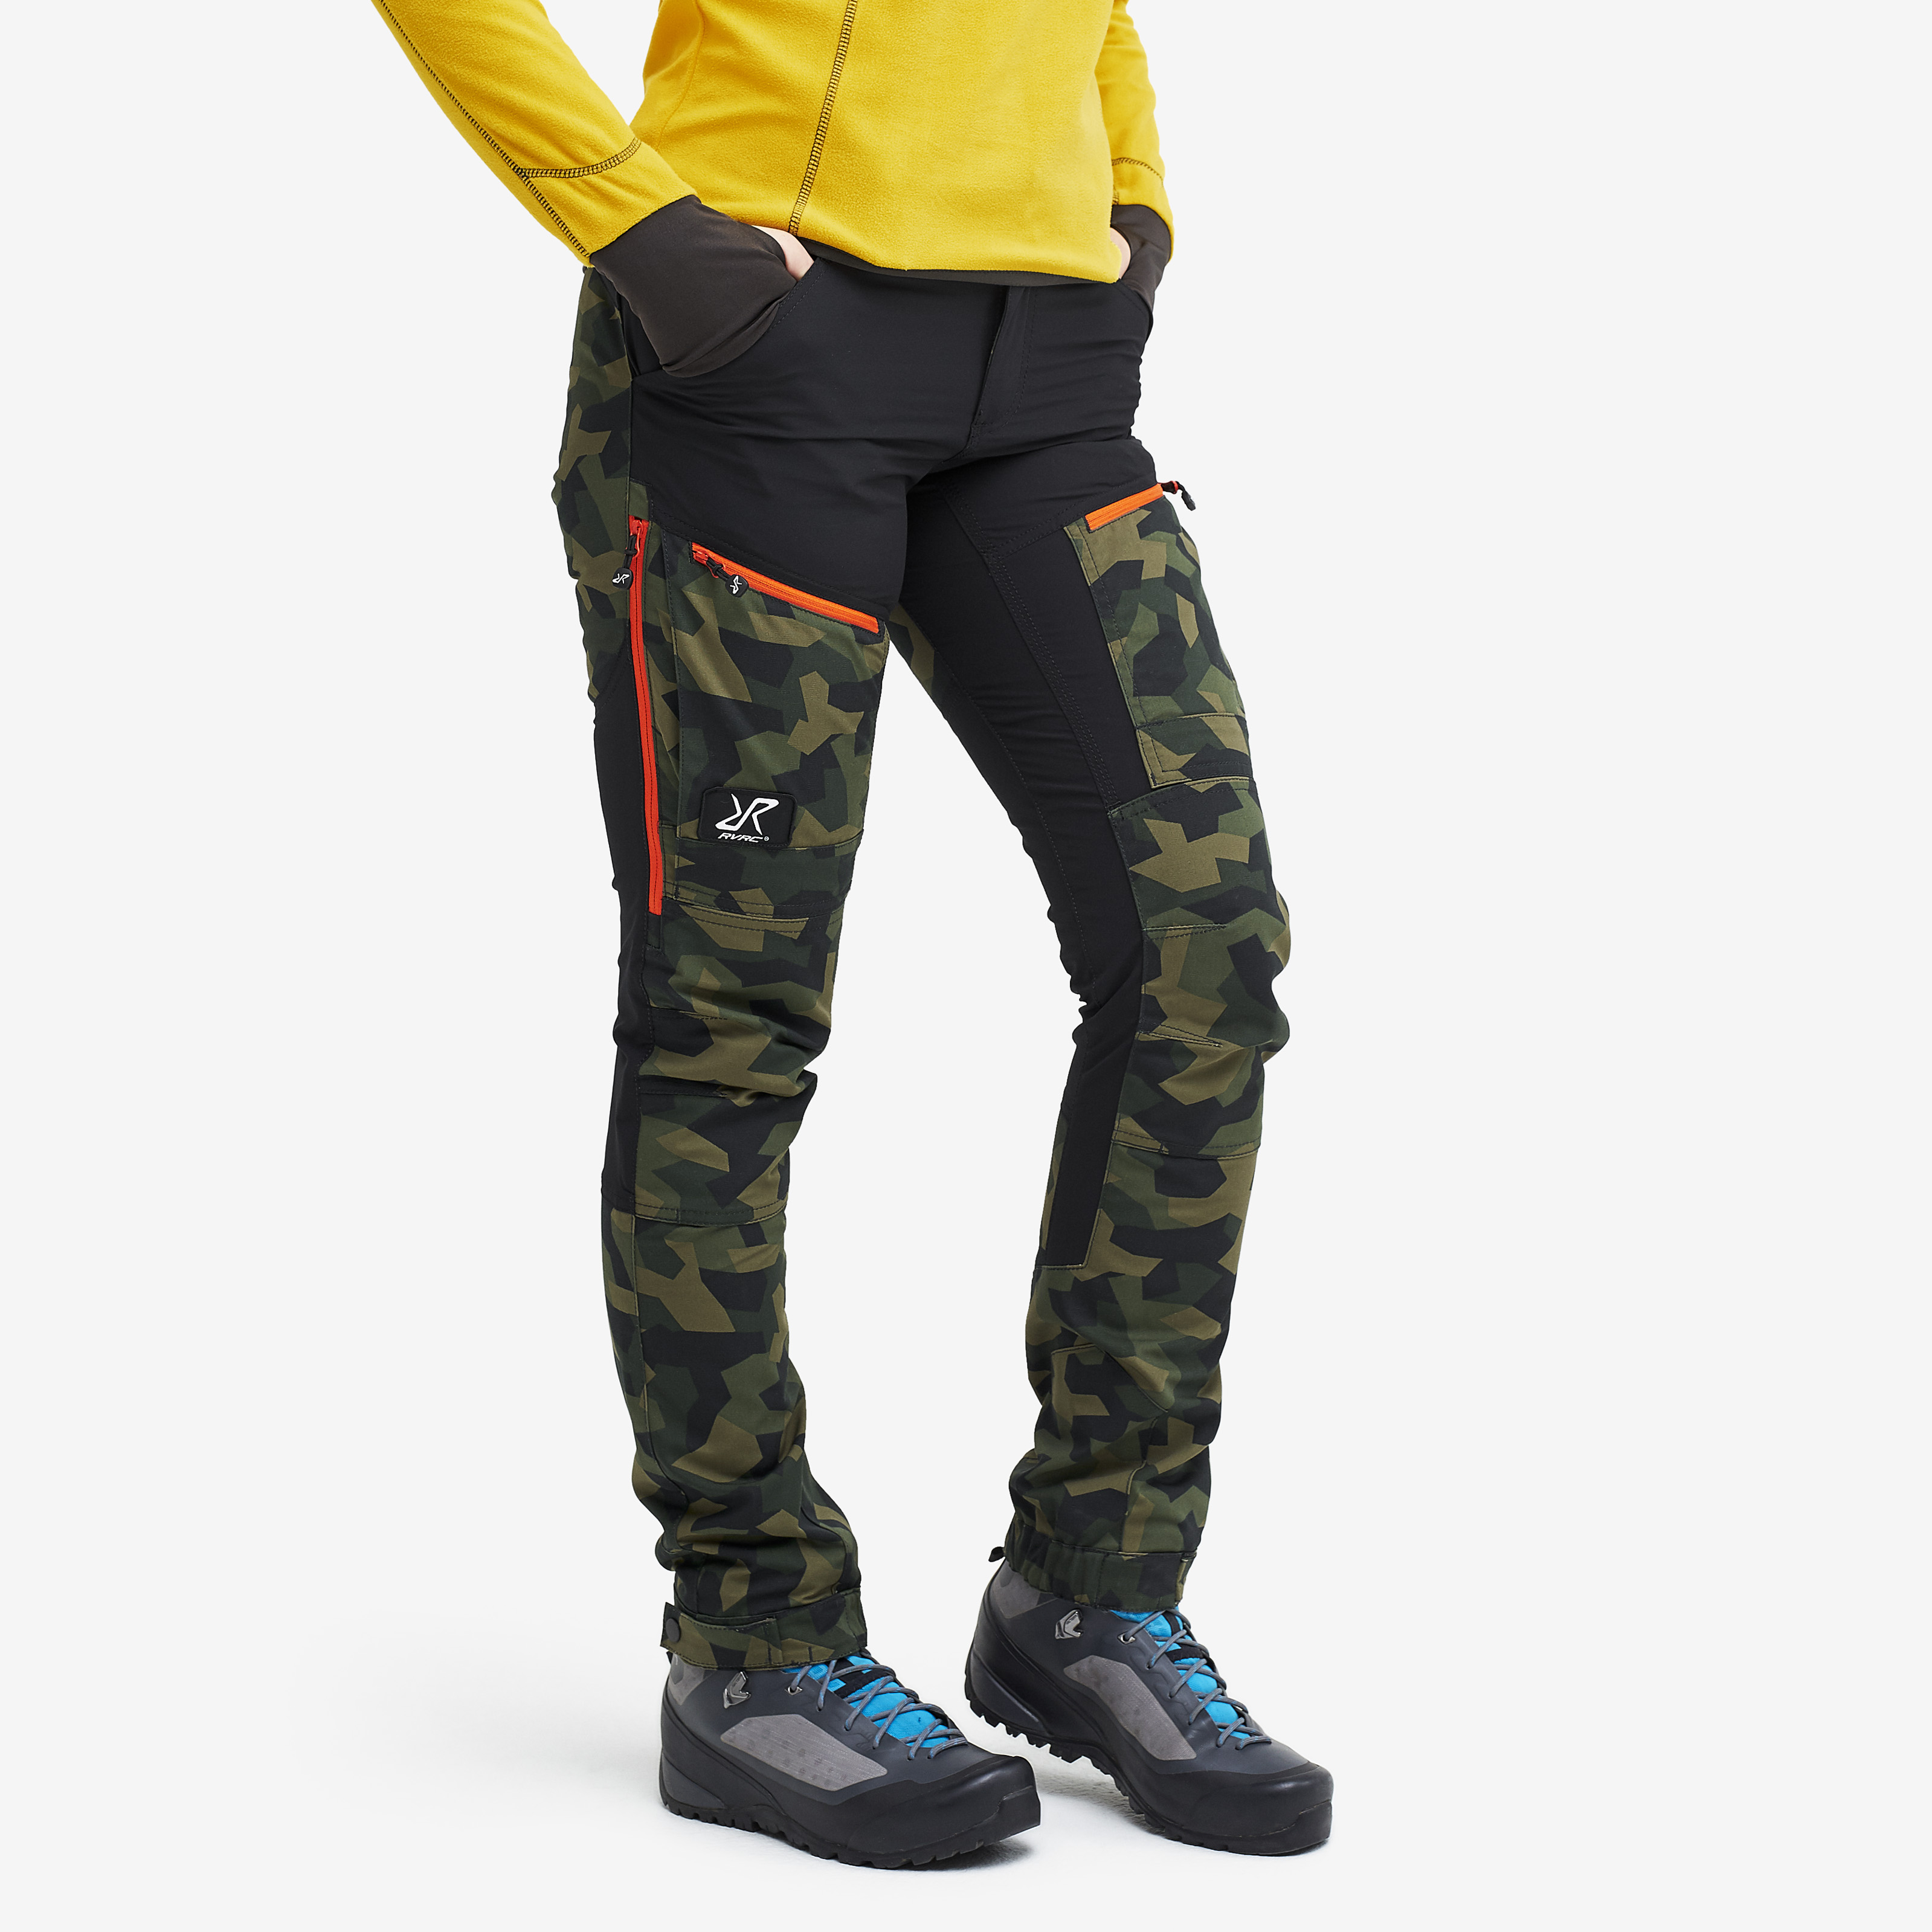 RVRC GP Pro hiking trousers for women in green